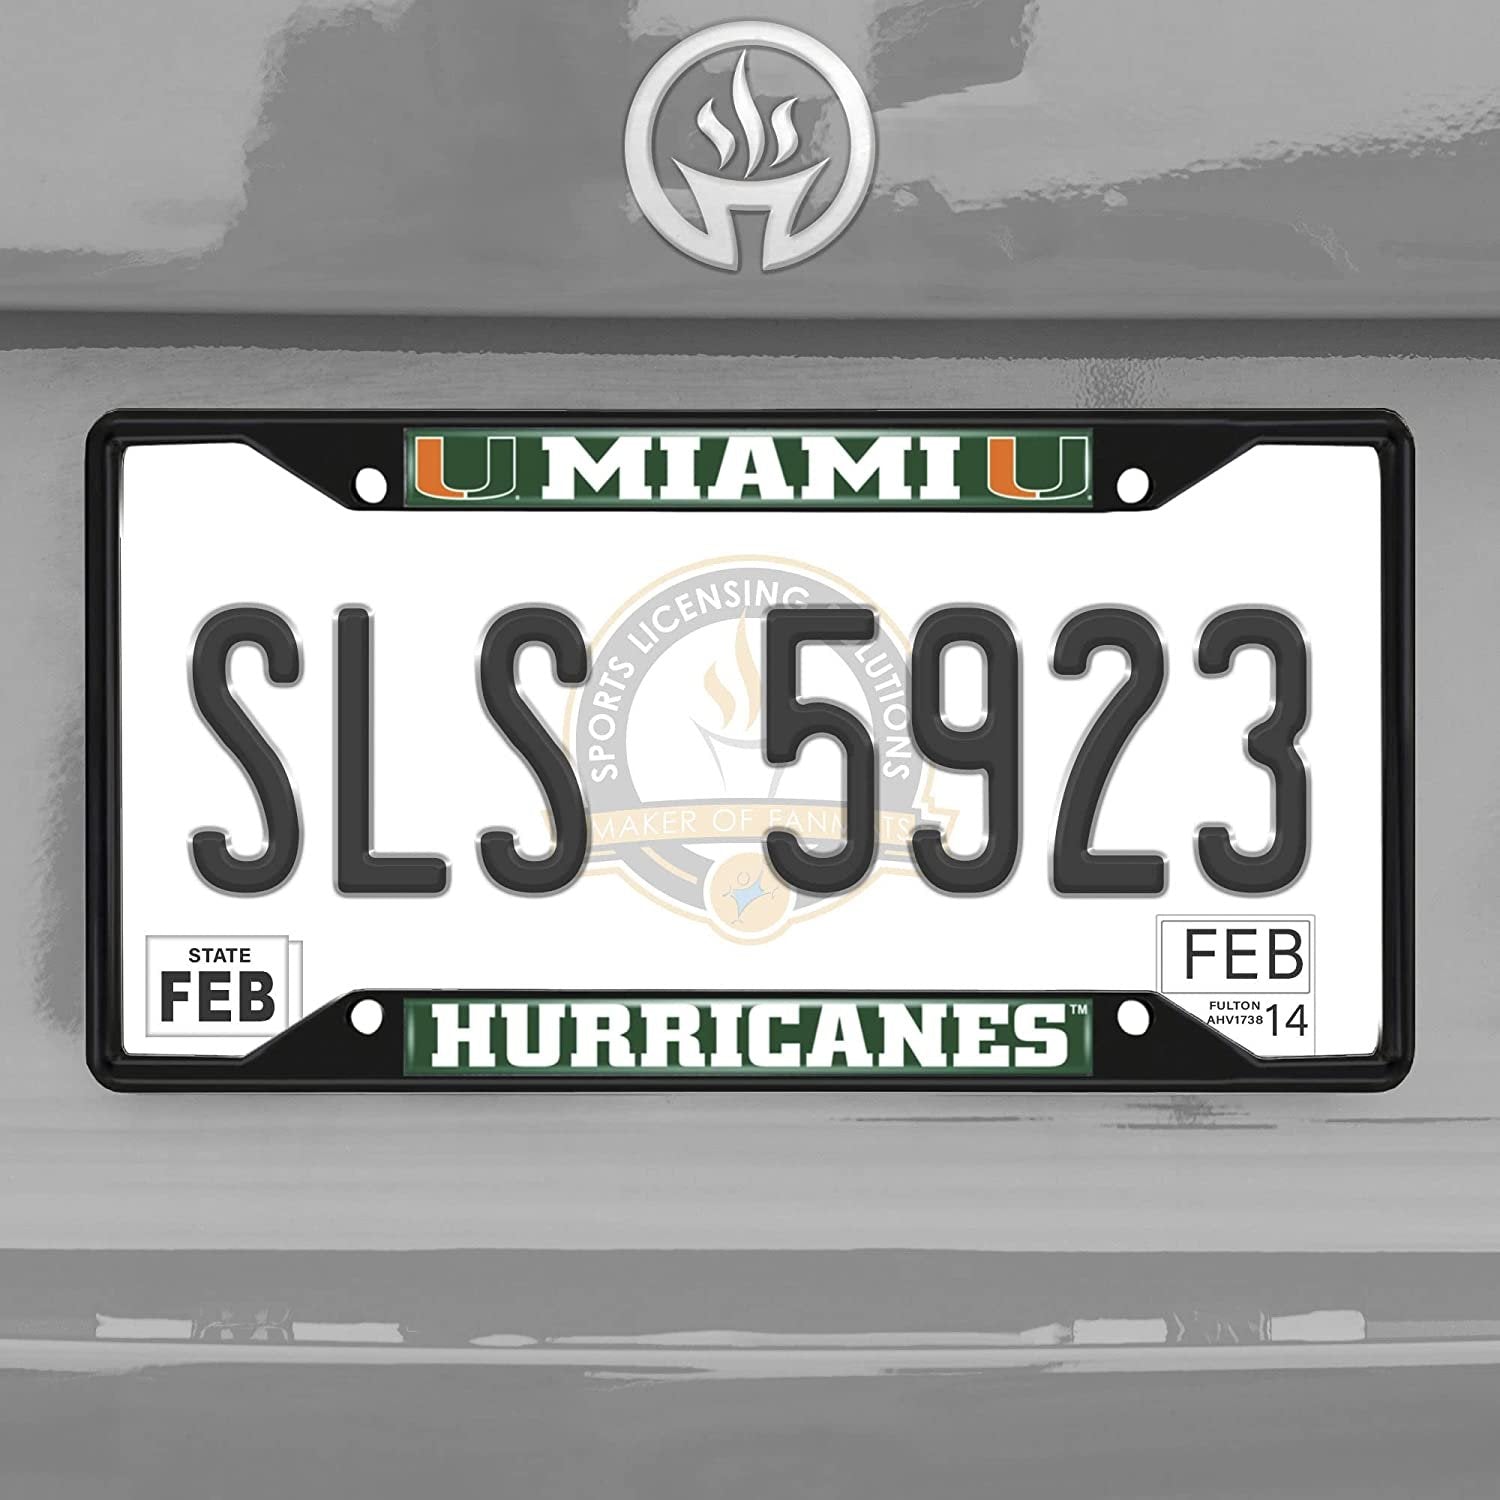 University of Miami Hurricanes Black Metal License Plate Frame Chrome Tag Cover 6x12 Inch